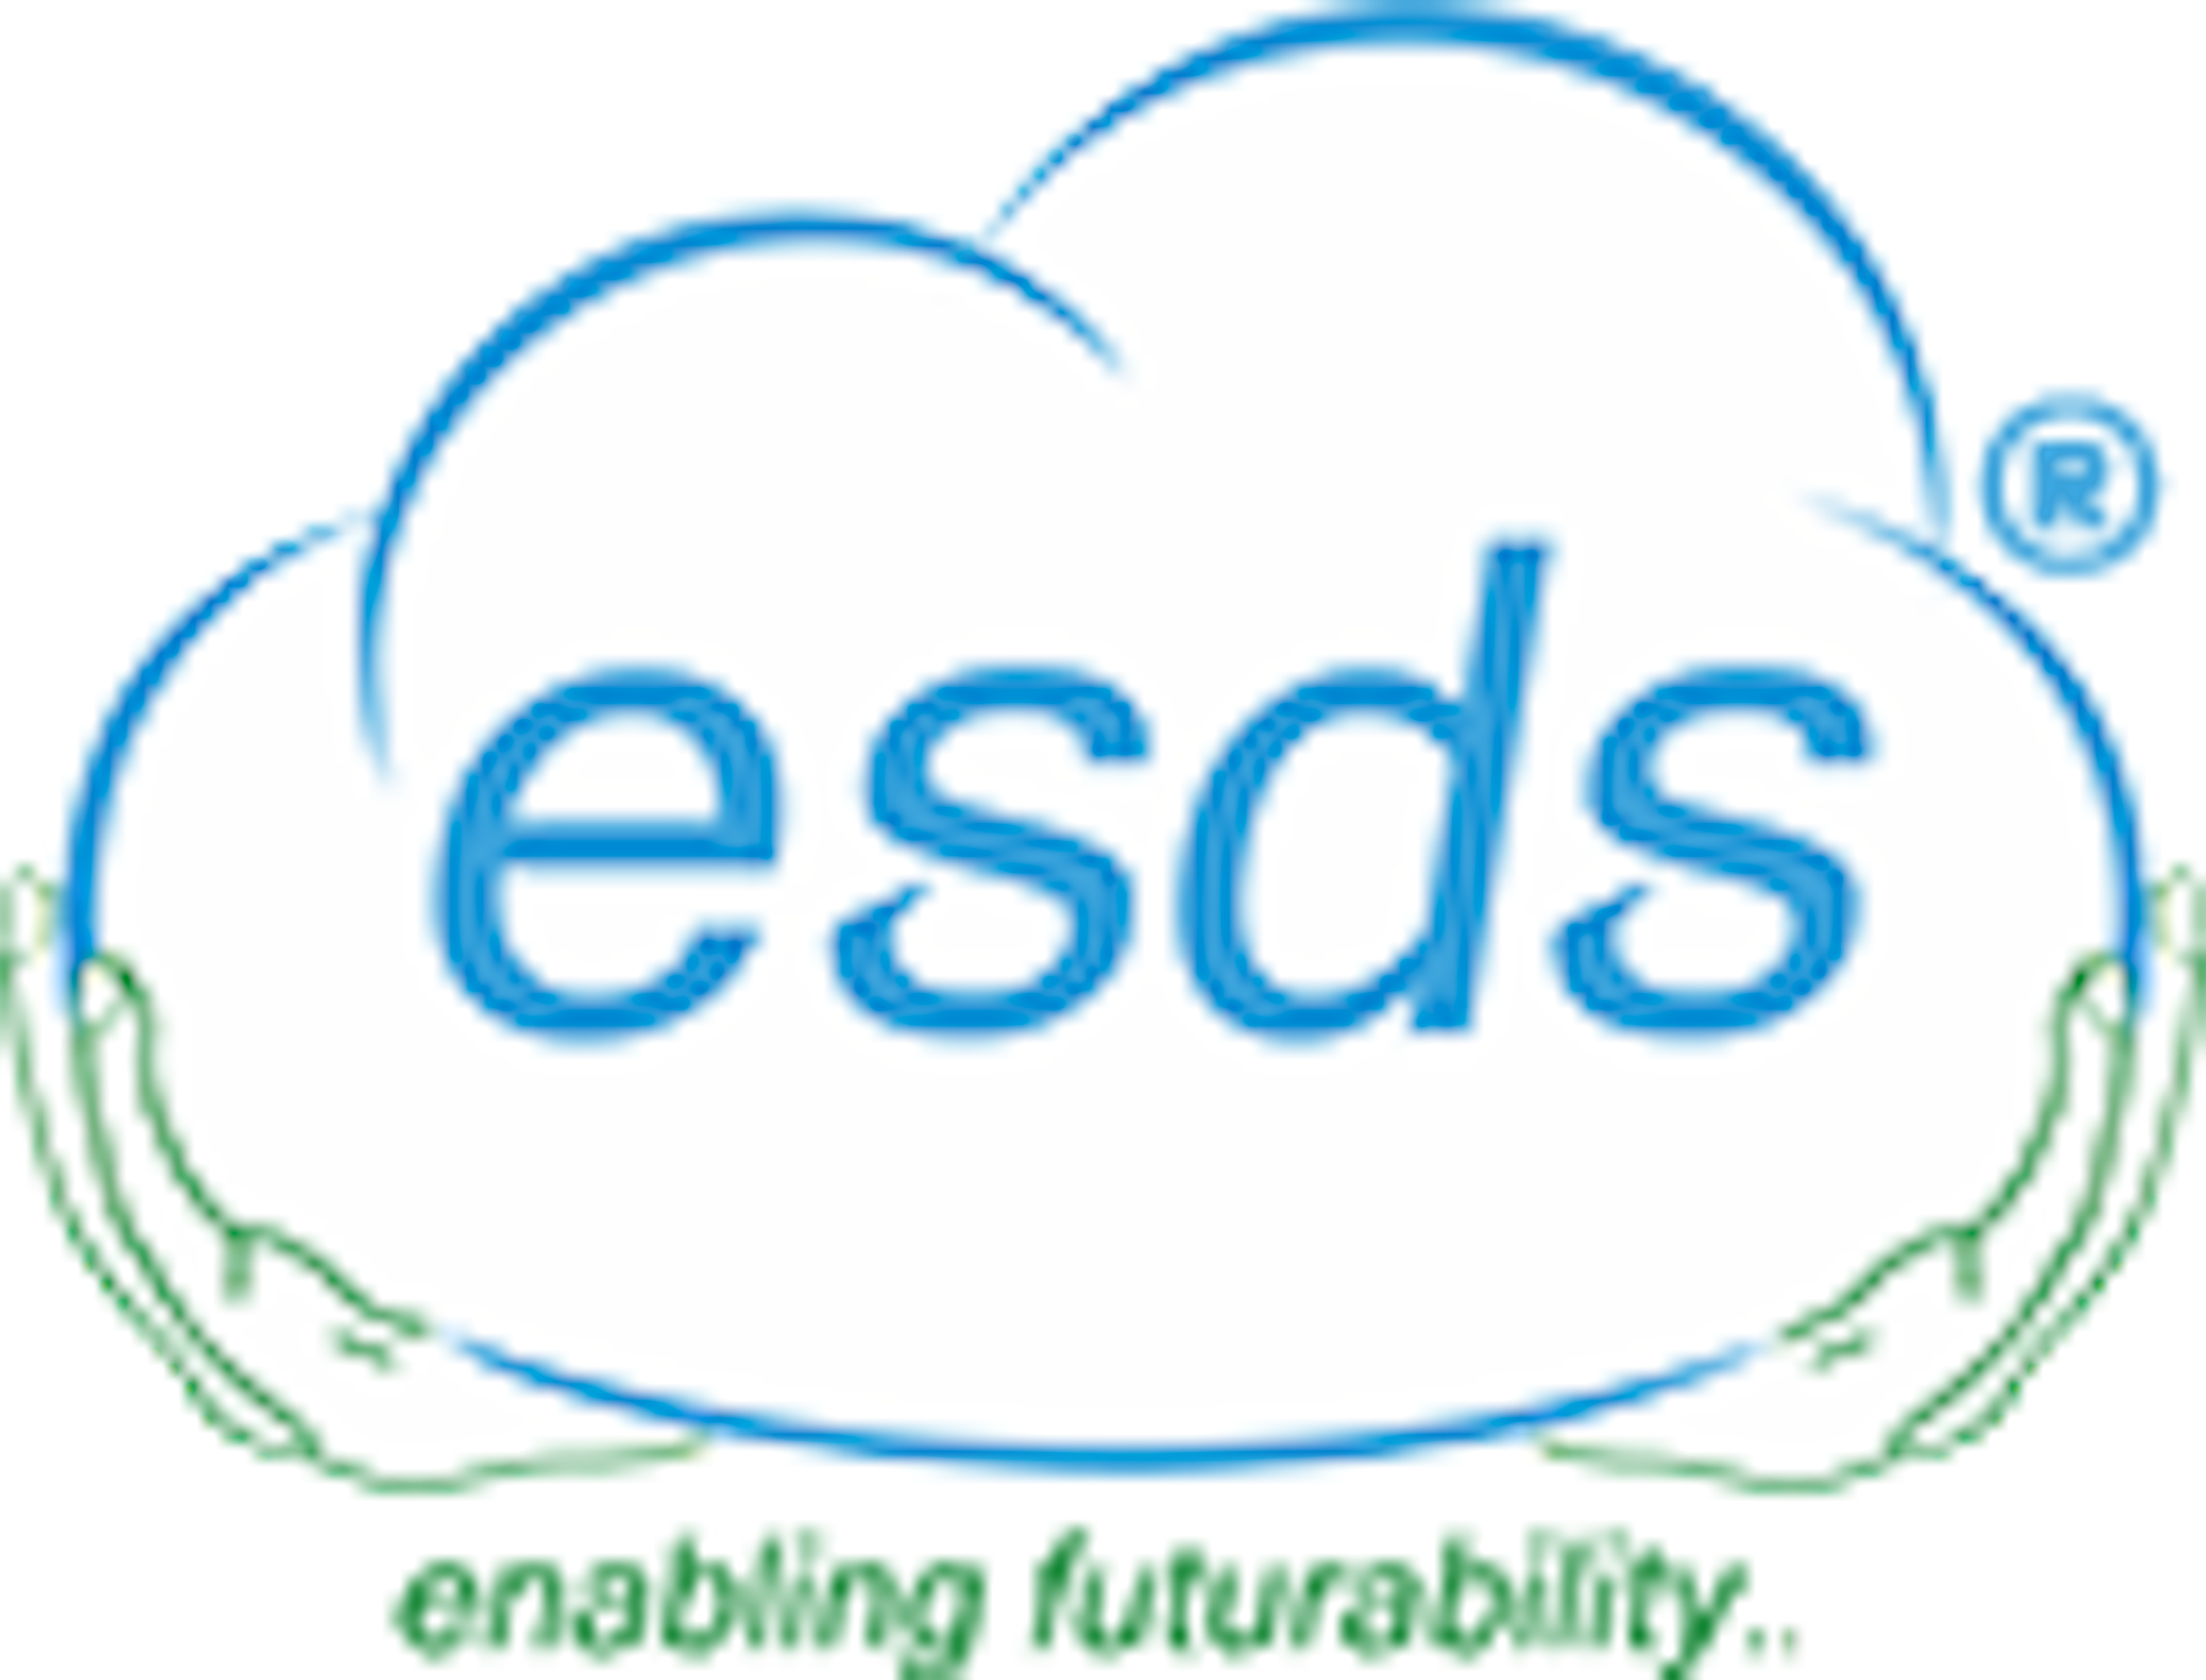 Esds.co.in